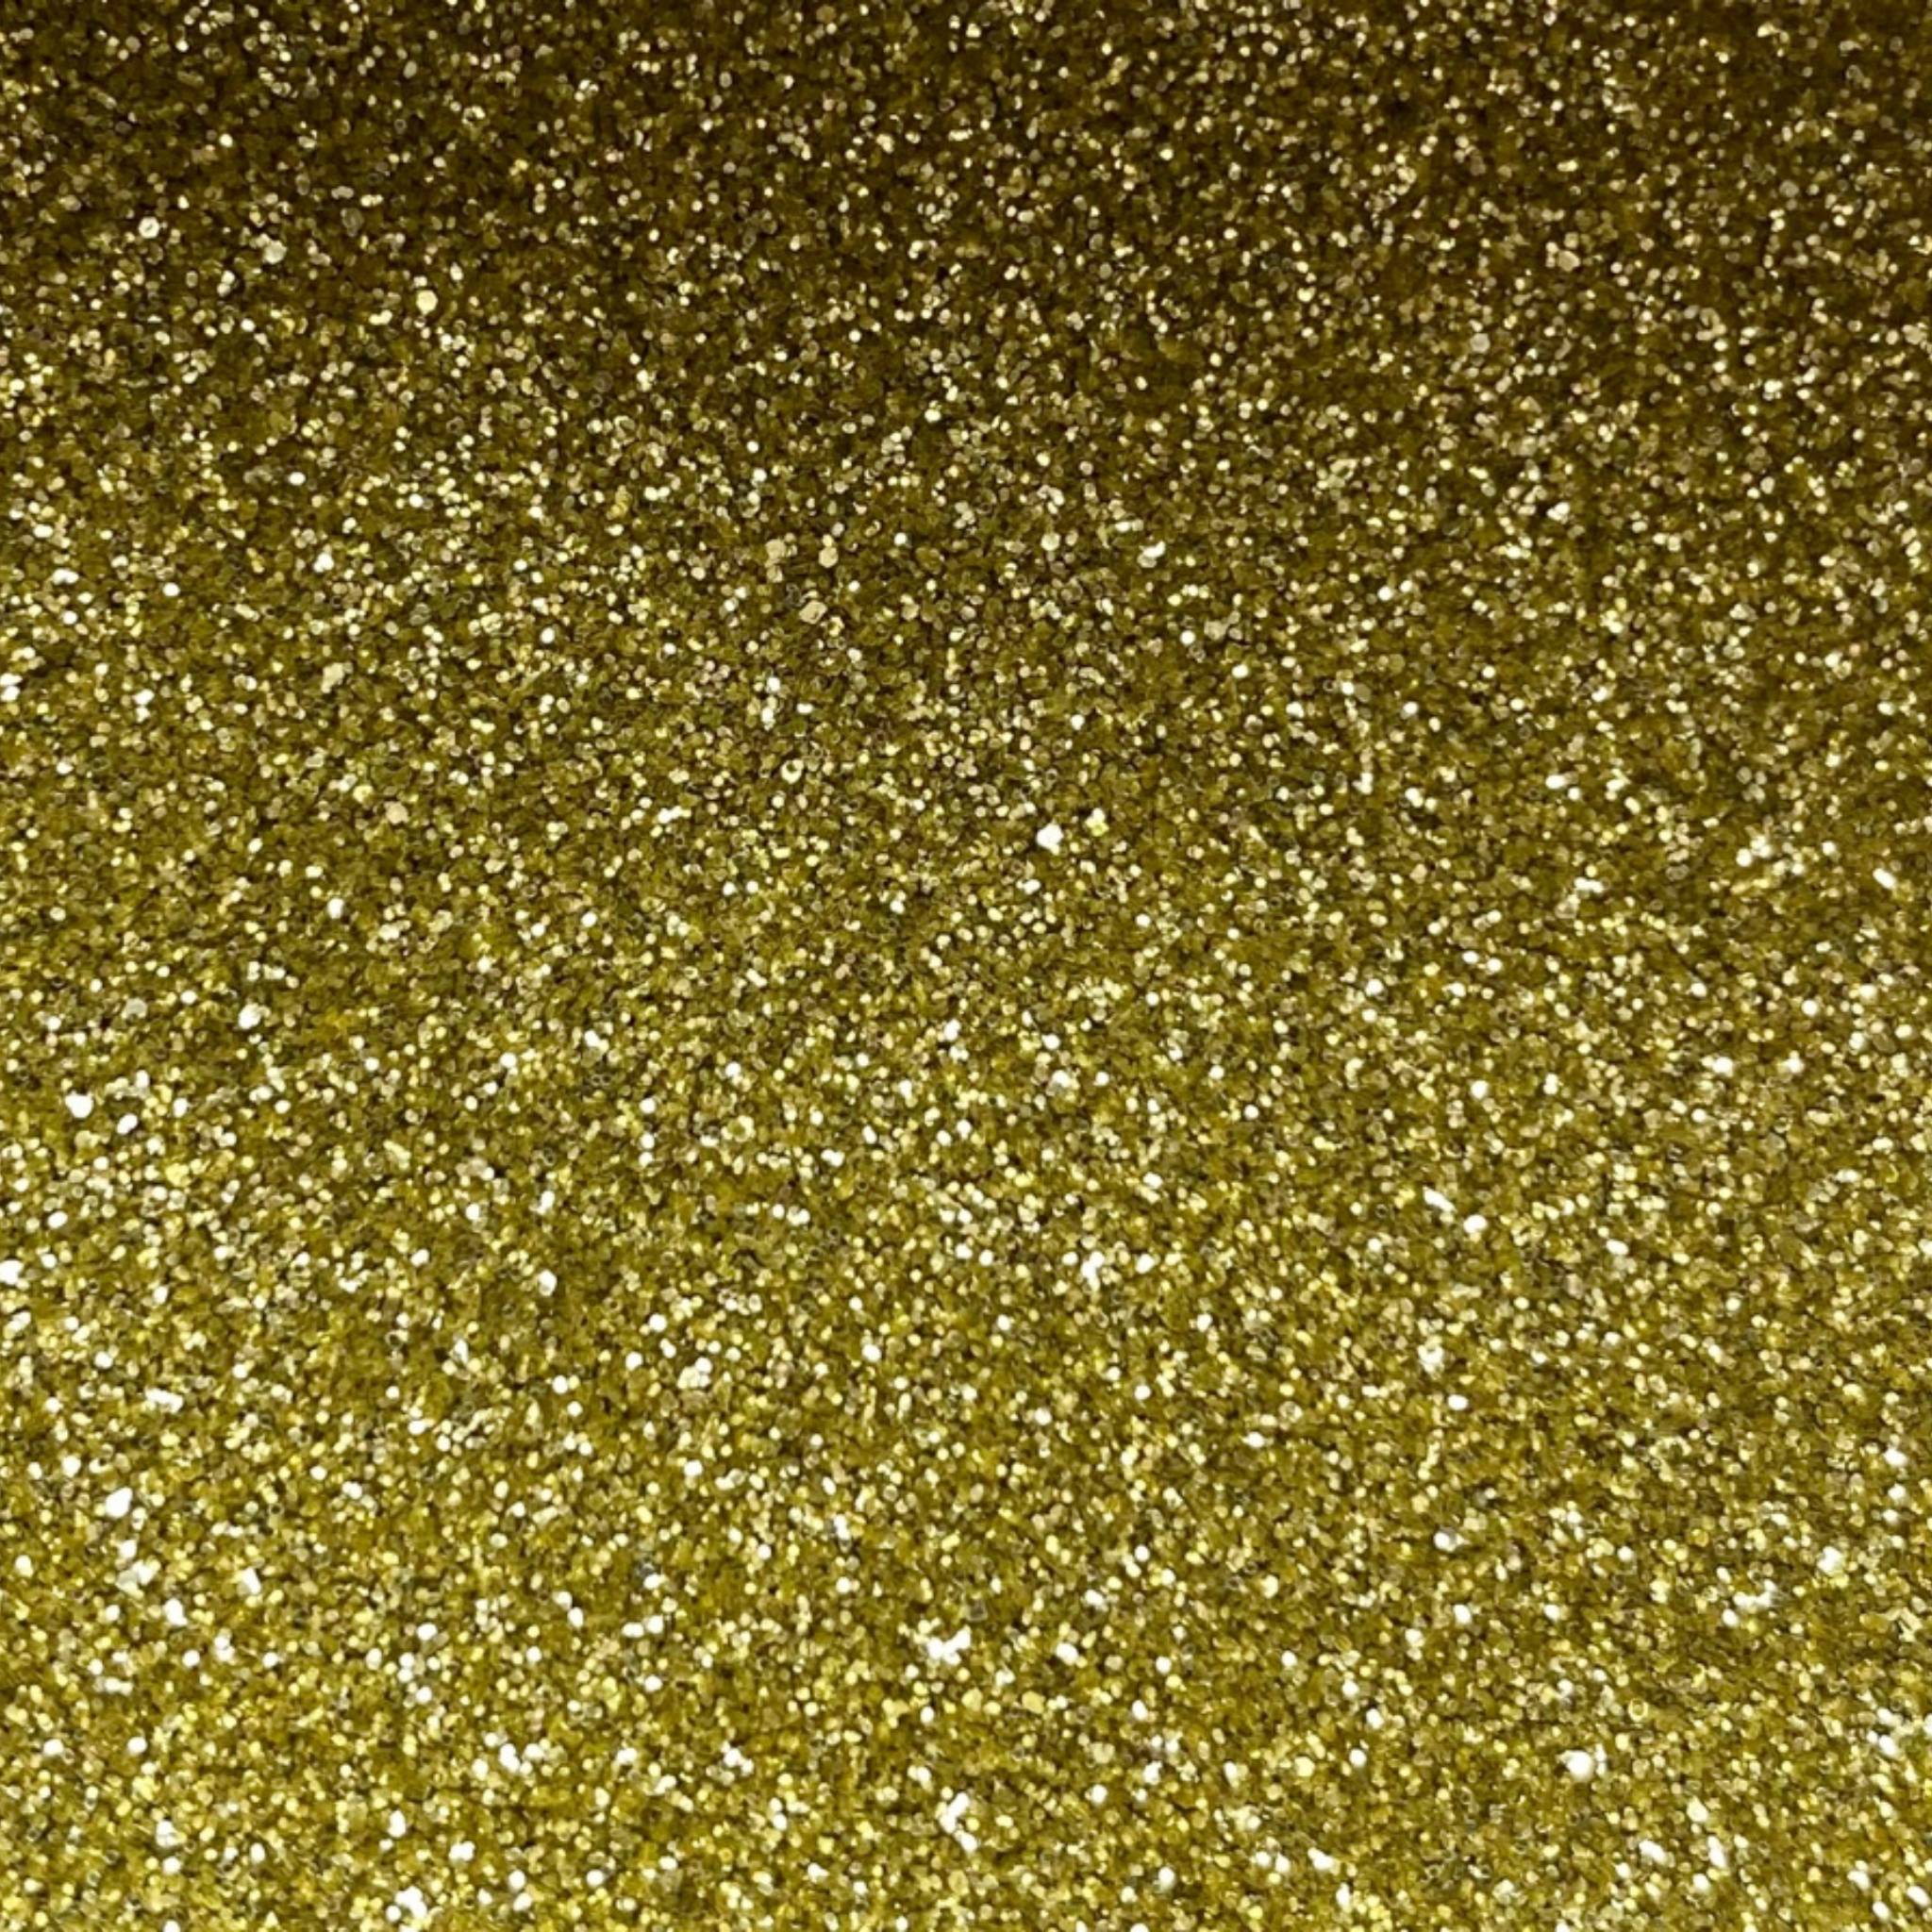 Gold eco glitter in a fine size. Hexagonal shaped bioglitter for face painters